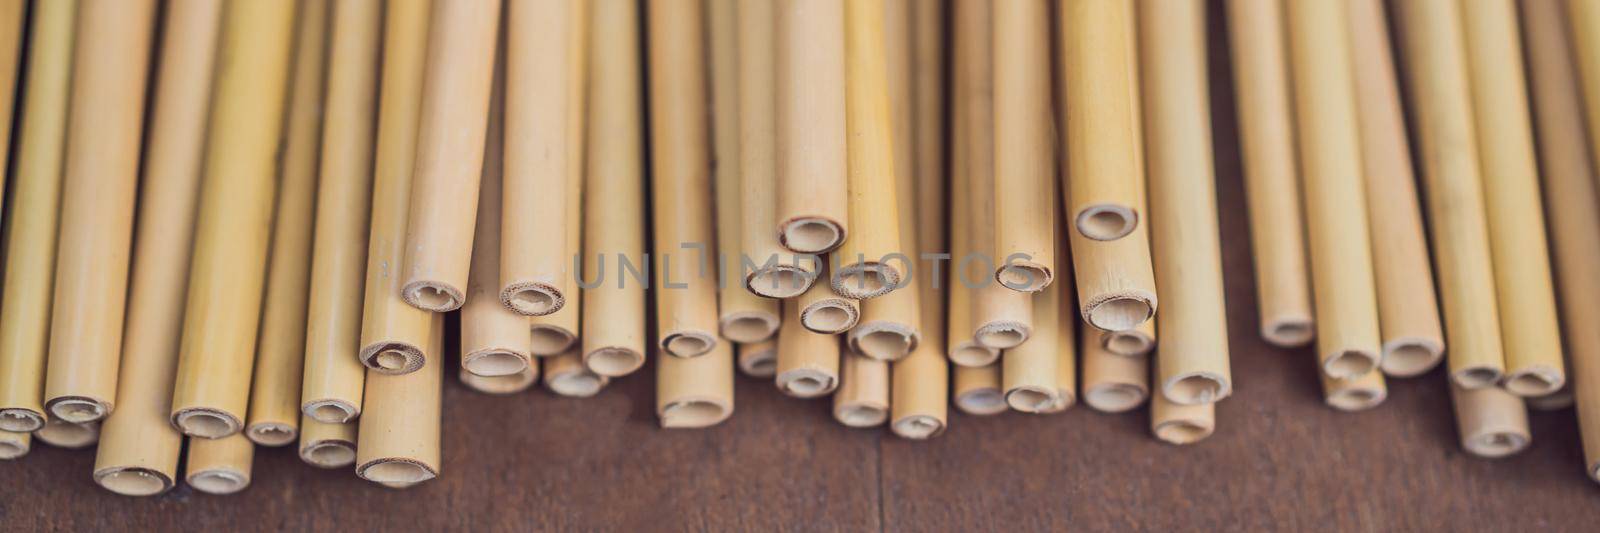 ecological bamboo straw or bamboo tube for drinking water just say 'no' to plastic small and lightweight and as such often evade recycling efforts BANNER, LONG FORMAT by galitskaya